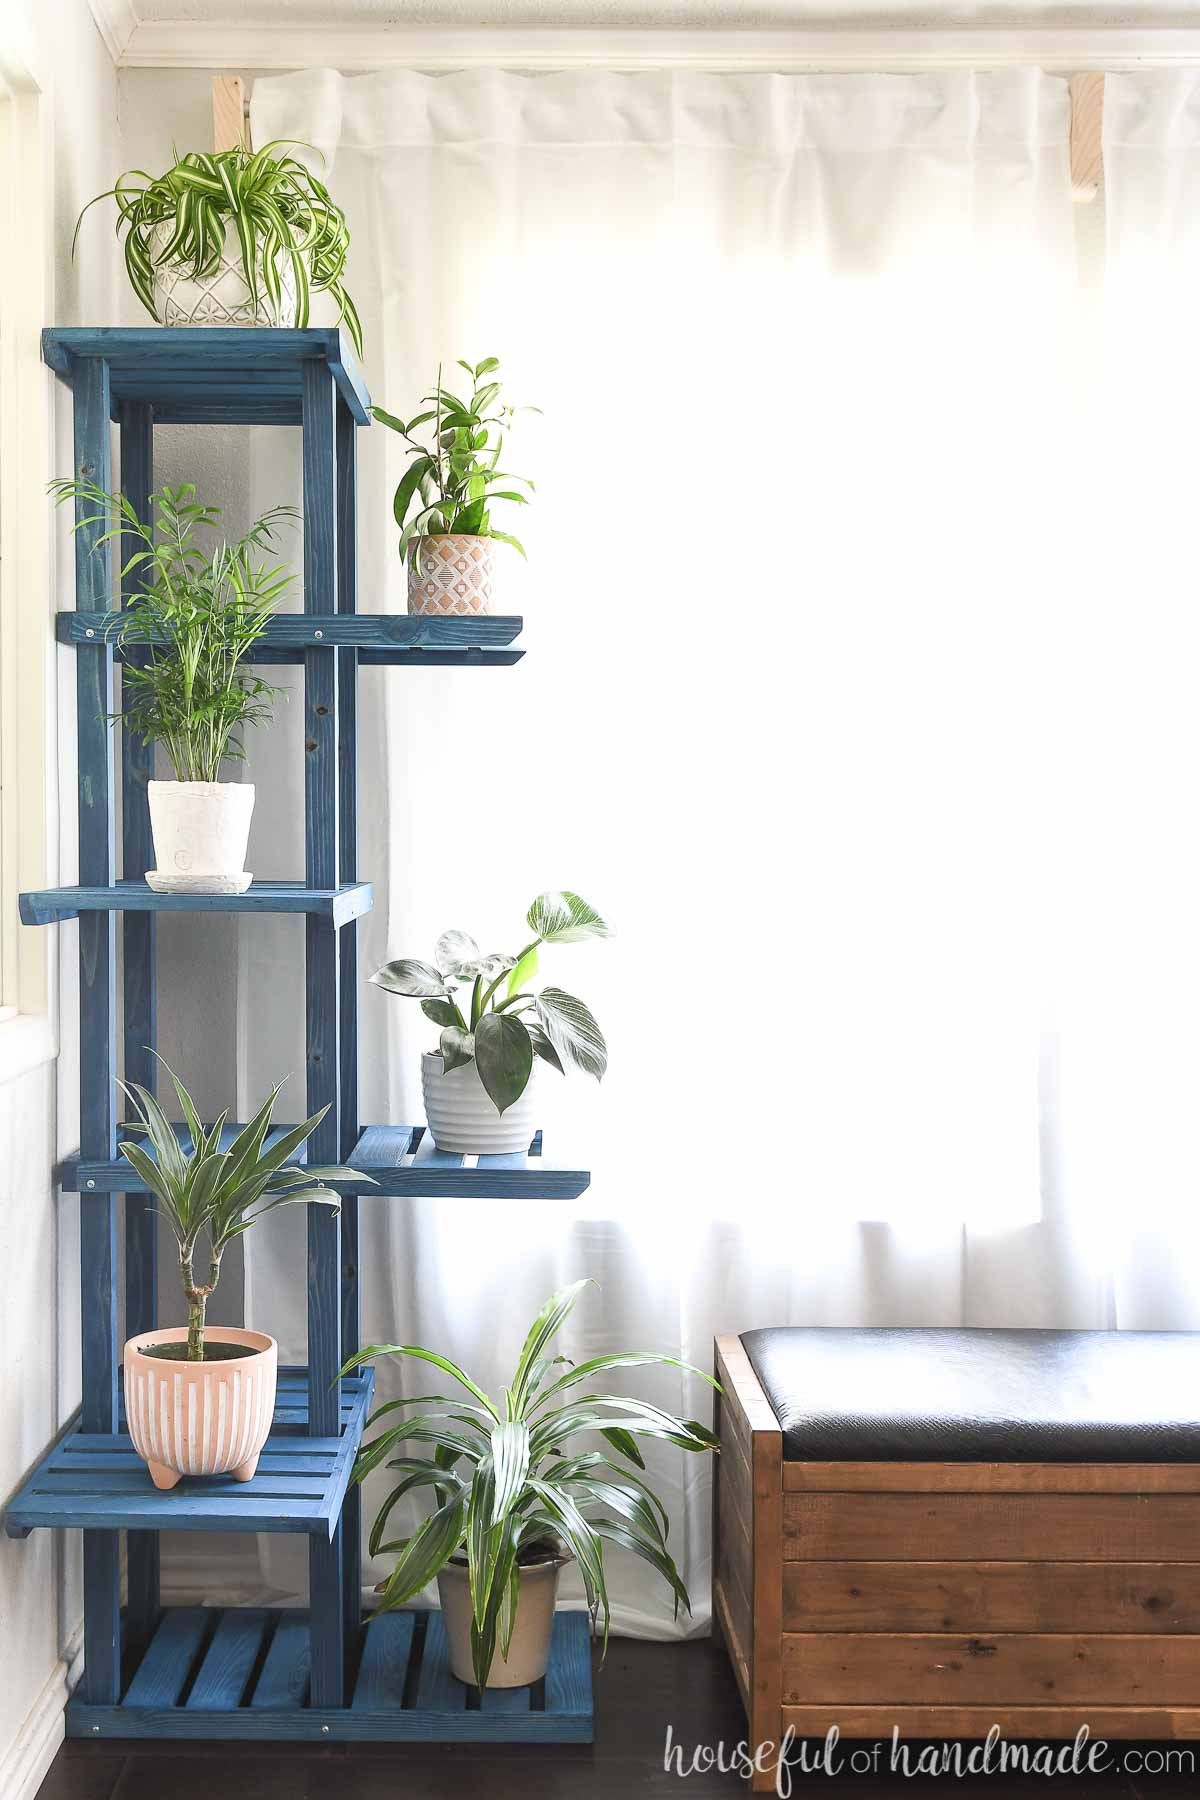 Corner Plant Stand Woodworking Plans